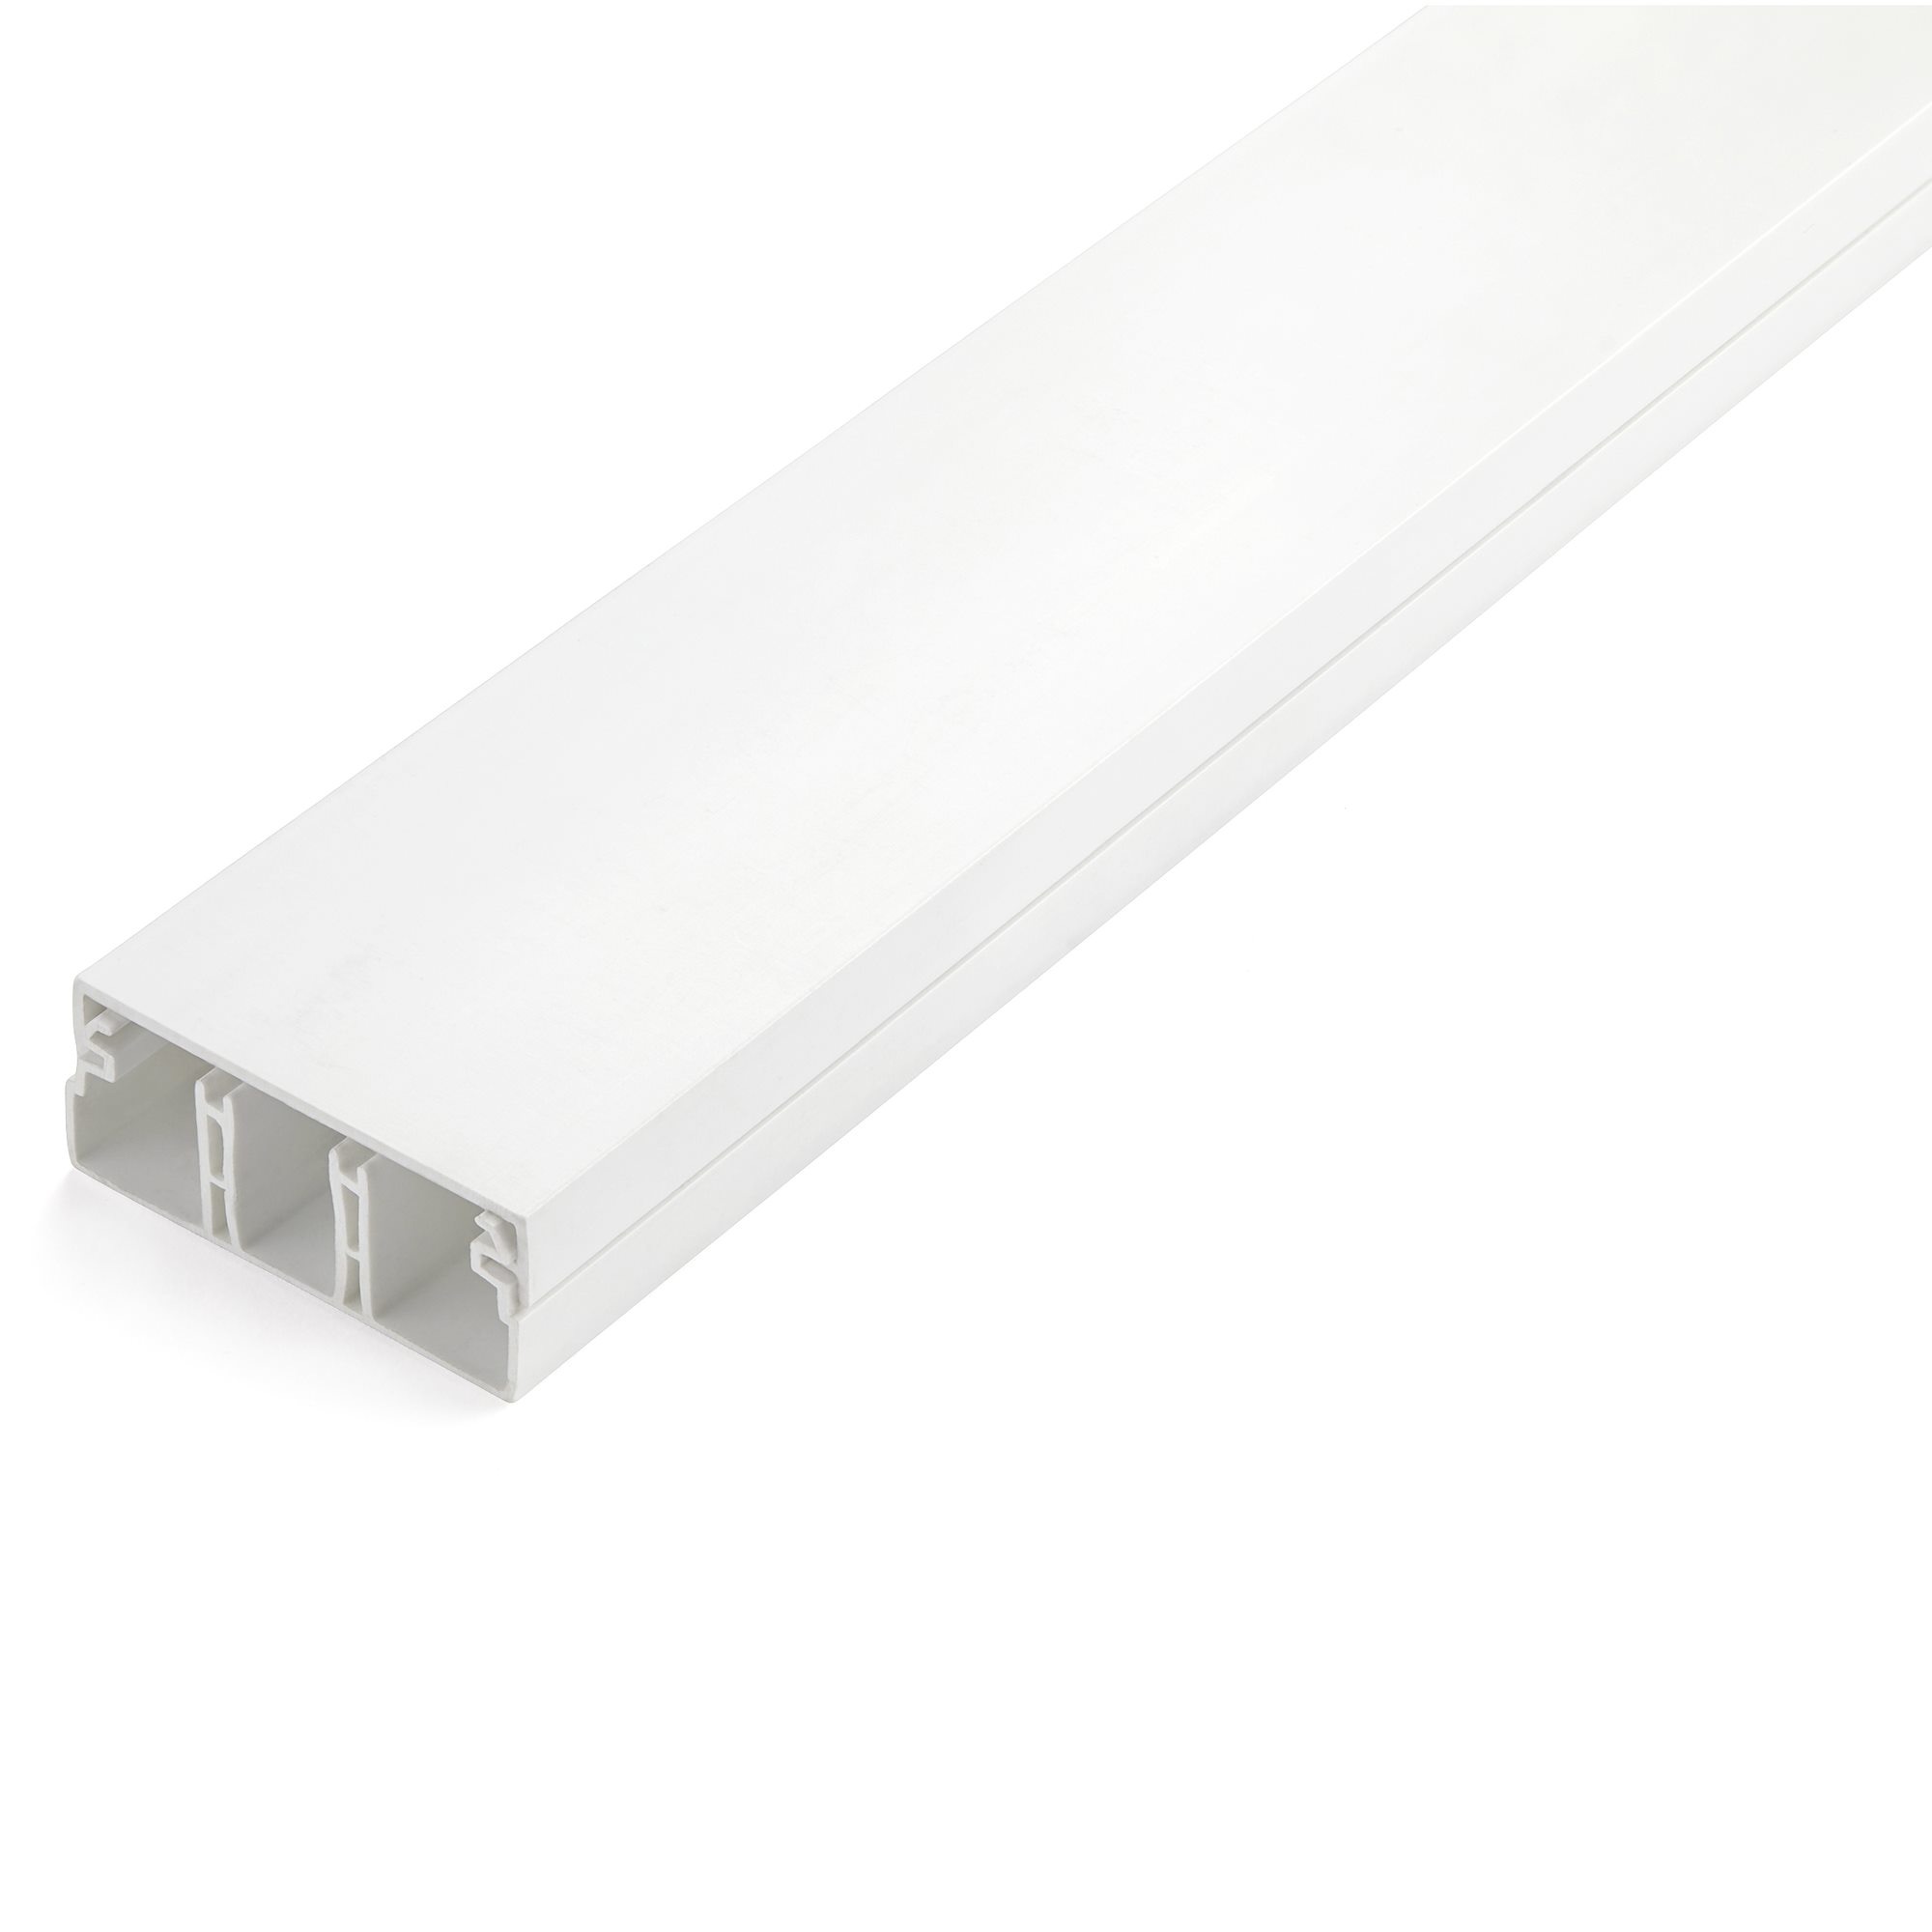 PVC Self Adhesive electrical mini trunking 200mm. Choose Lengths 